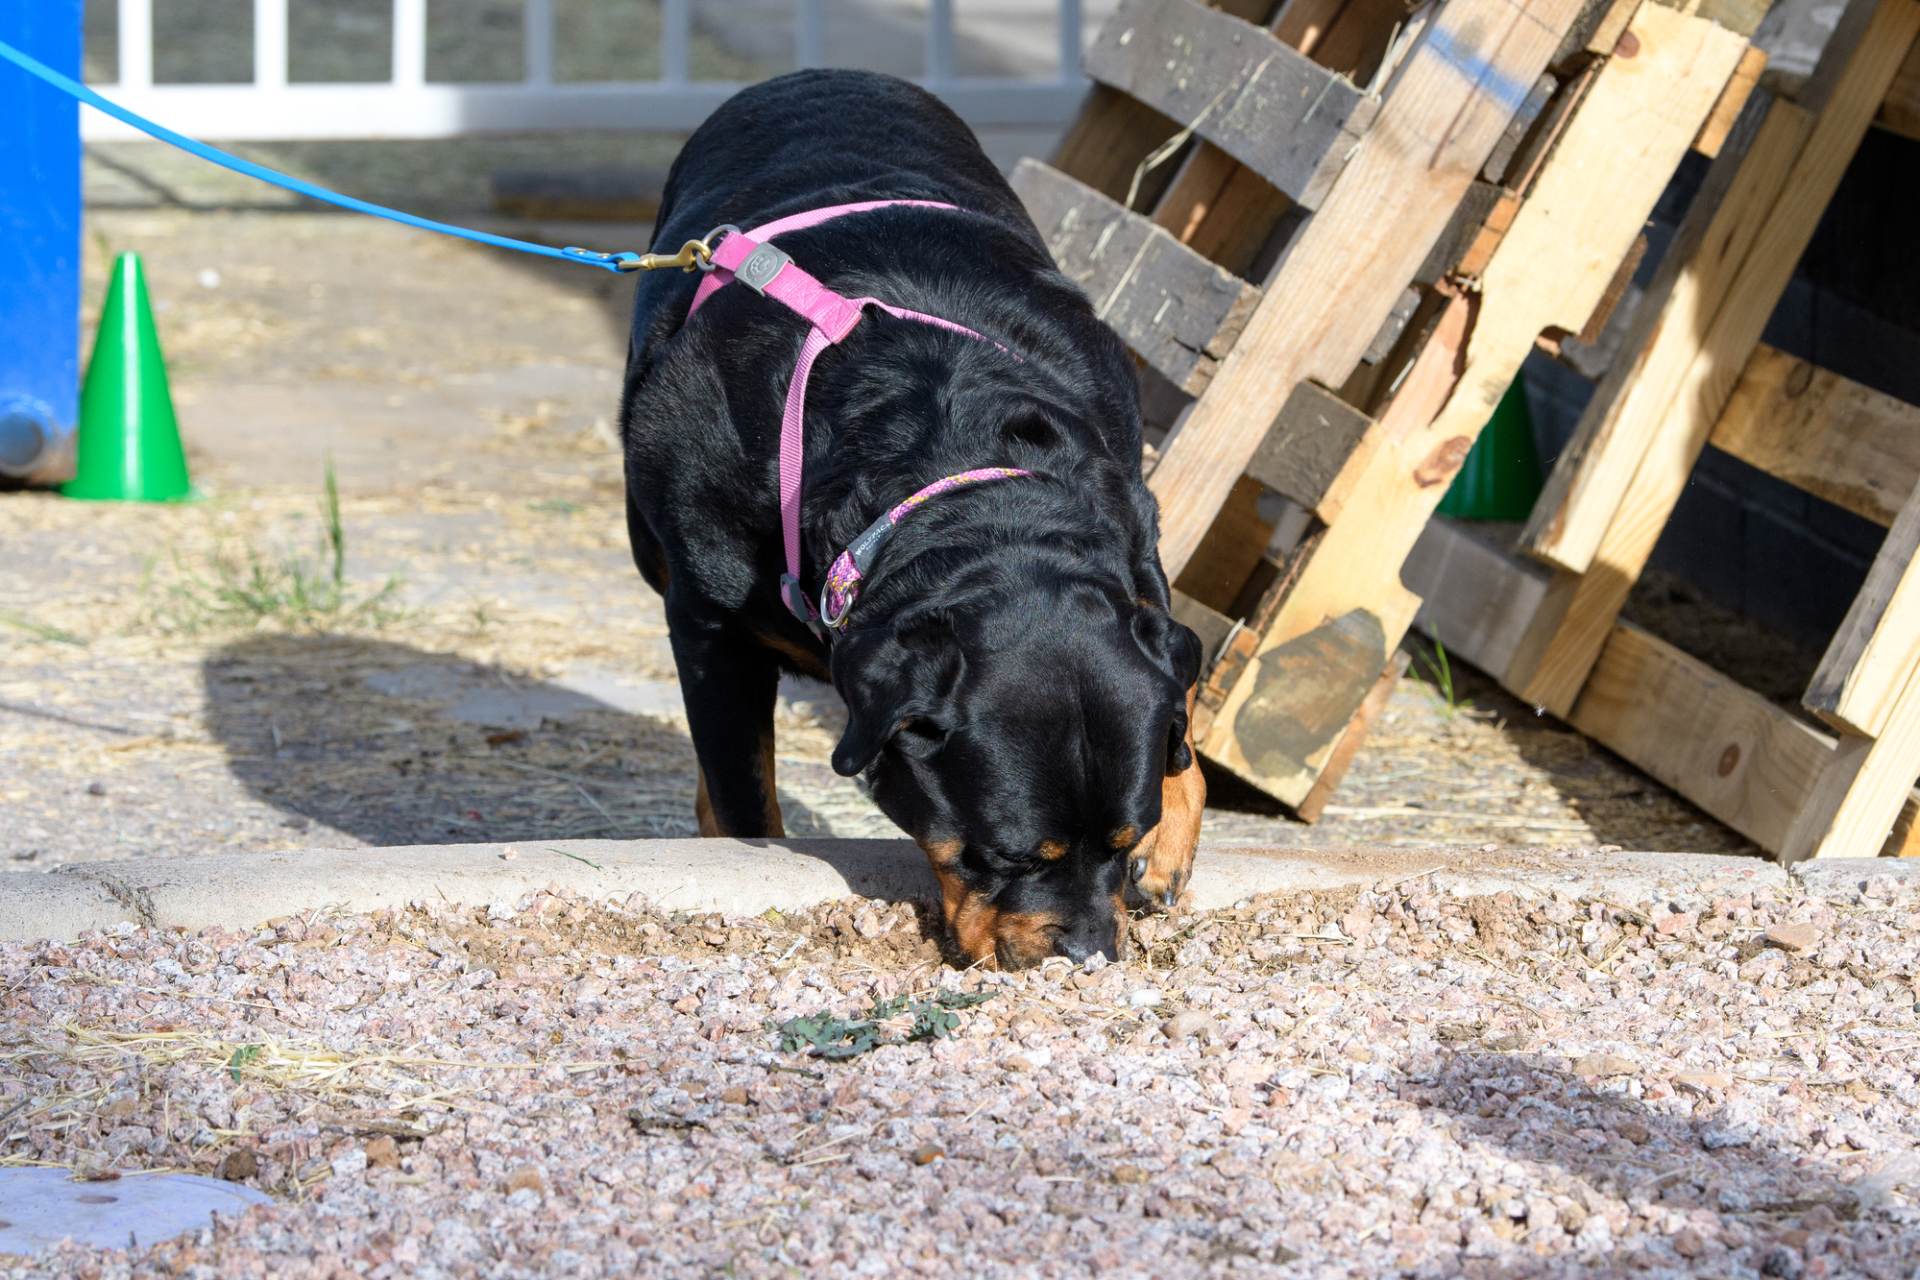 7 Nosework Games for Dogs: Stimulate Your Dog Through Scentwork!